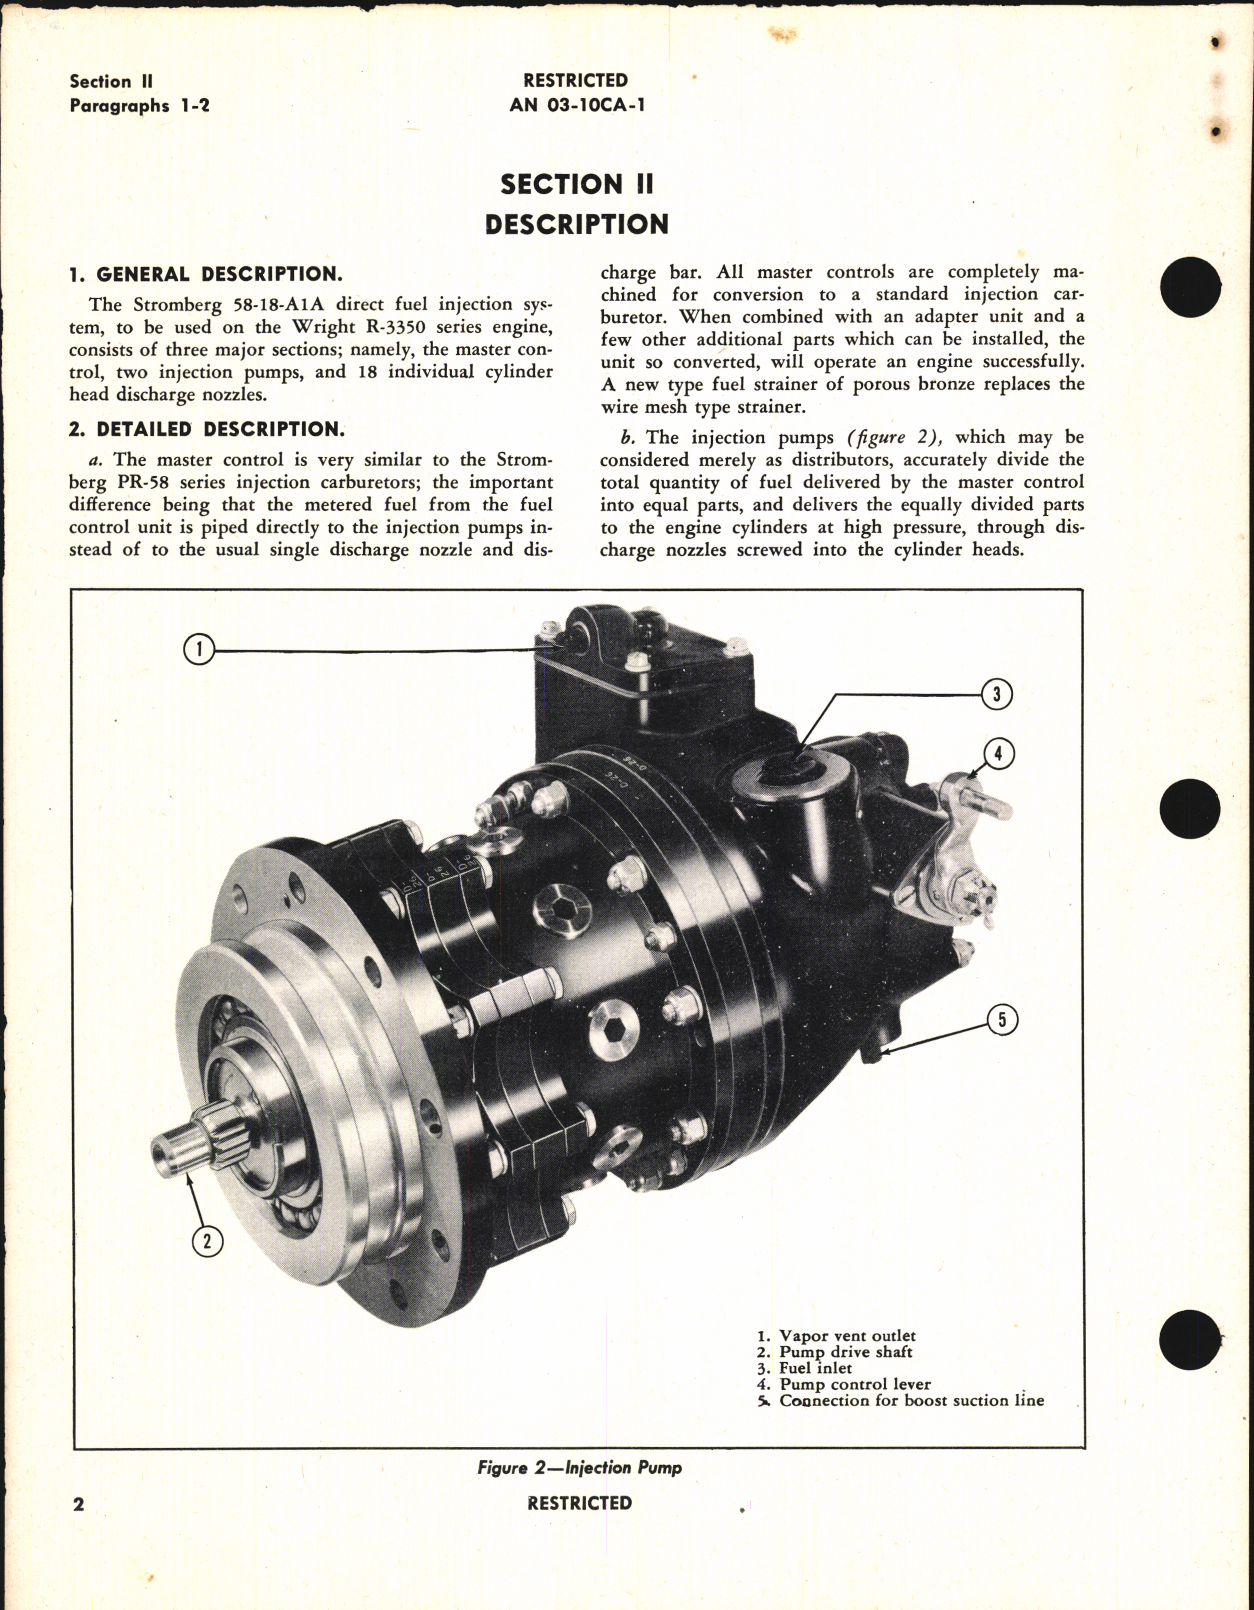 Sample page 6 from AirCorps Library document: Handbook of Instructions with Parts Catalog for Direct Fuel Injection System Model 58-18-A1A